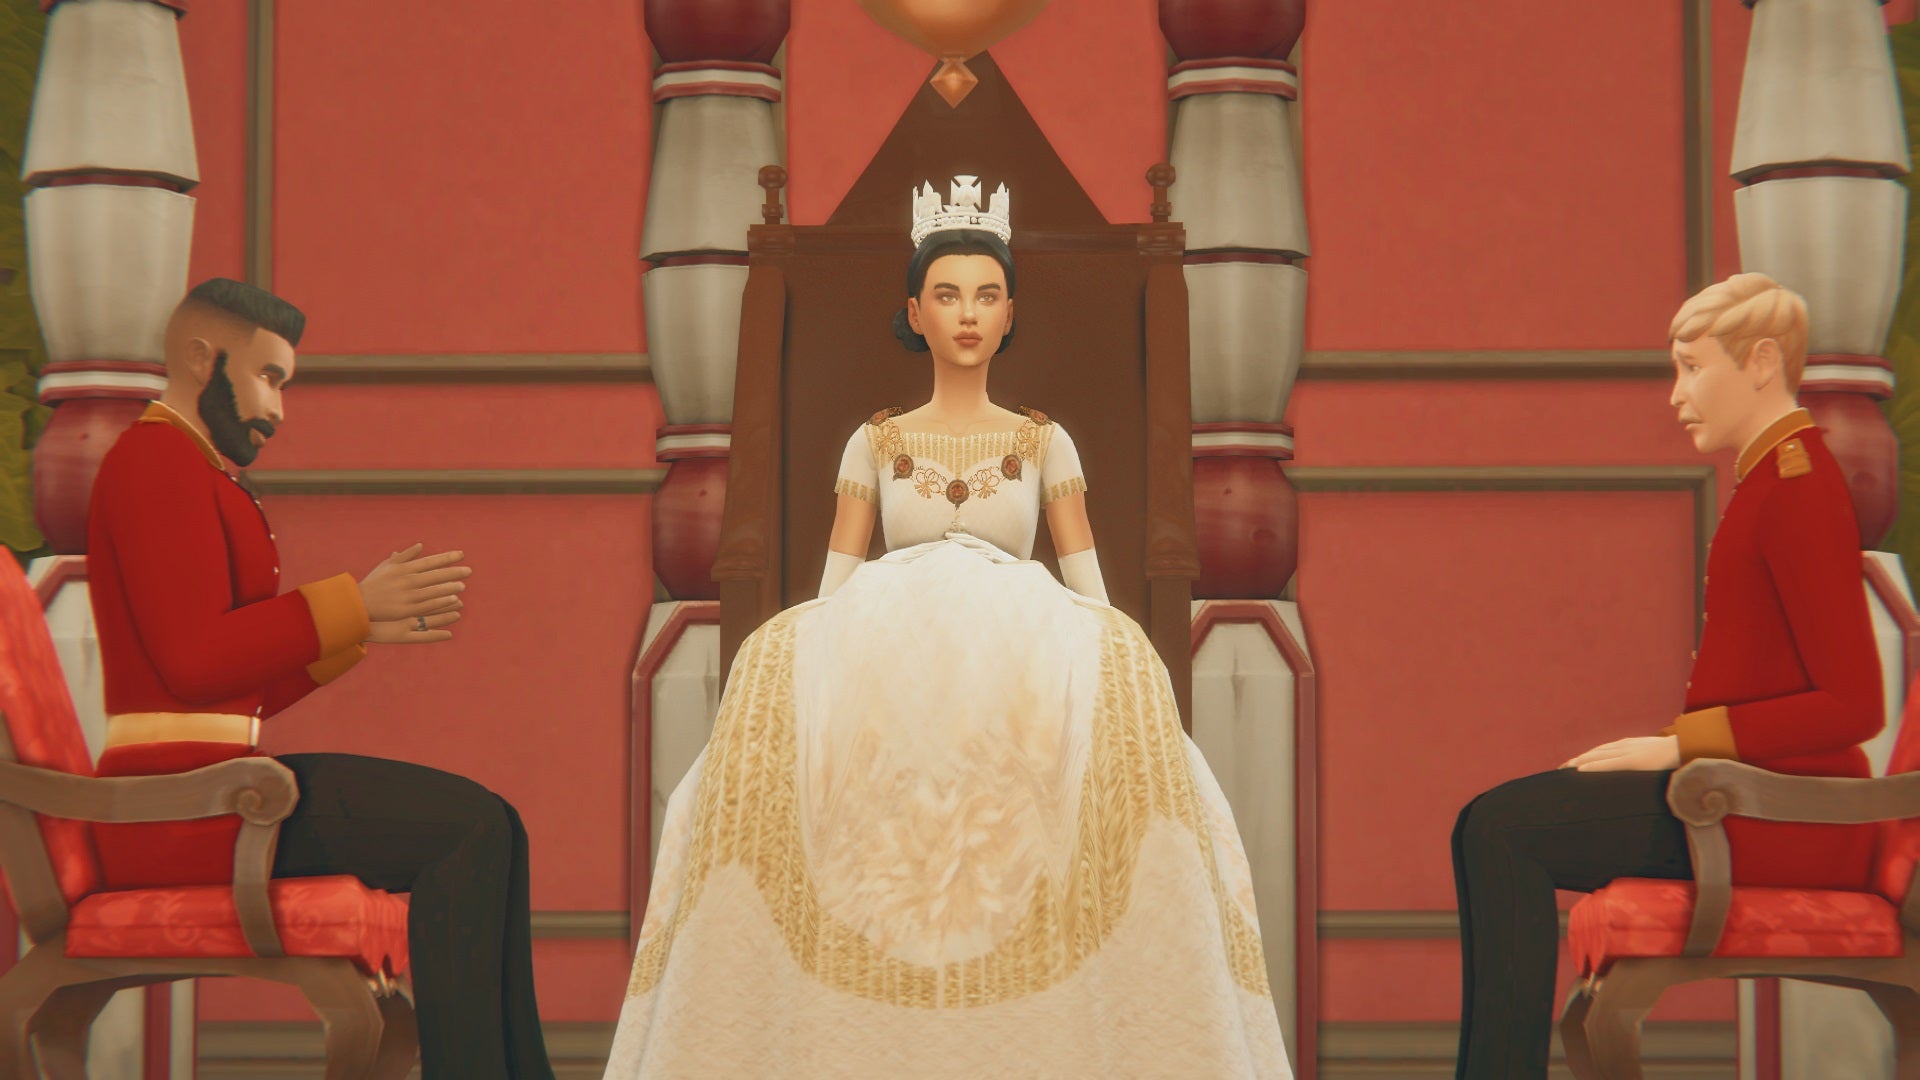 A female Sim in a white ballgown and crown sits on a throne, attended by two male Sims in red guard uniforms. This is a promotional image for the Royalty Mod.